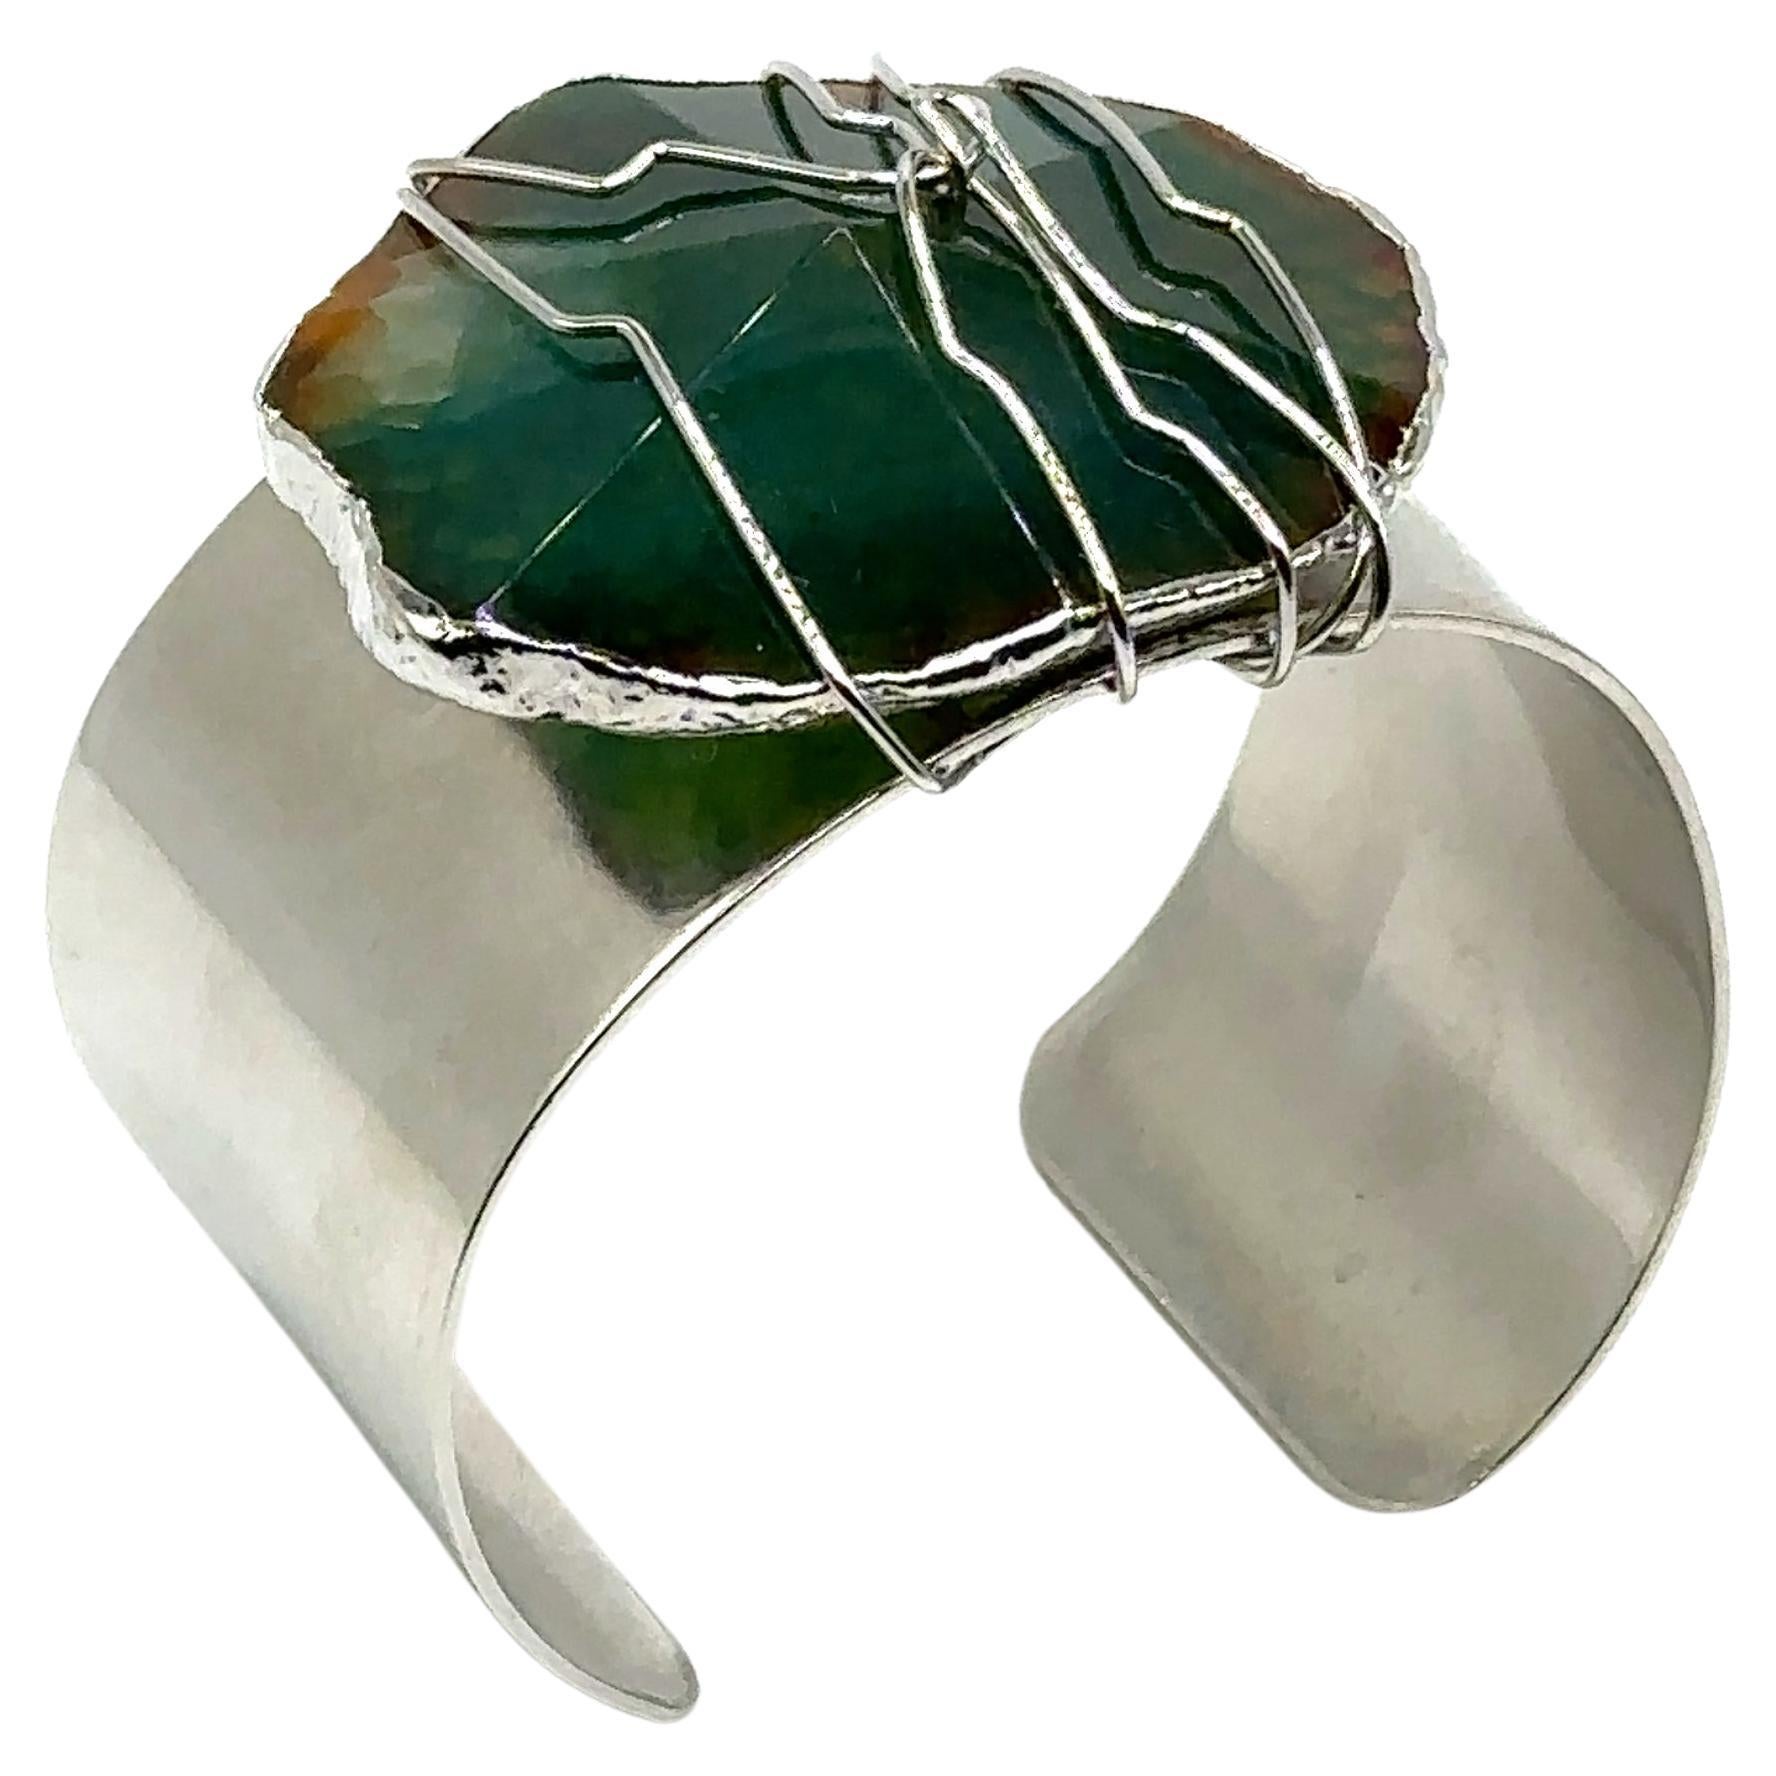 Bailey - Bracelet cuff white rhodium plated with green agate For Sale